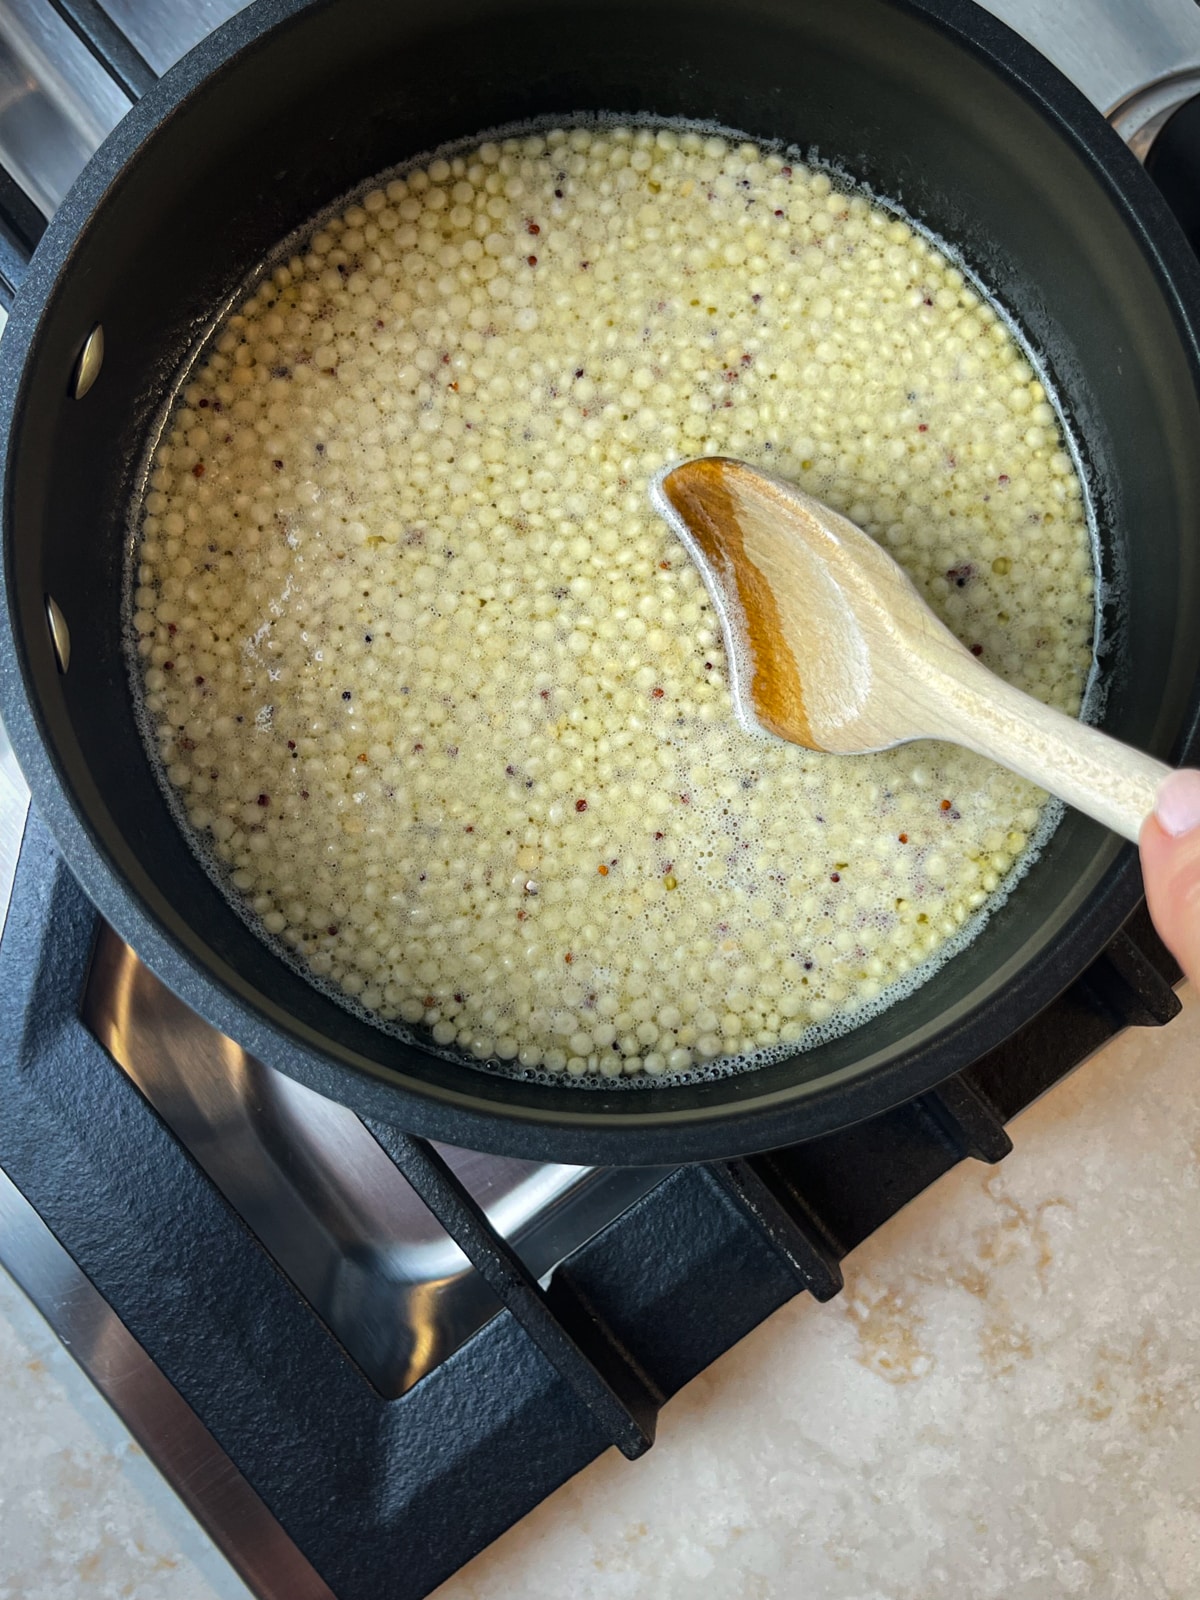 A wooden spoon stirring couscous in a pot over a stove.